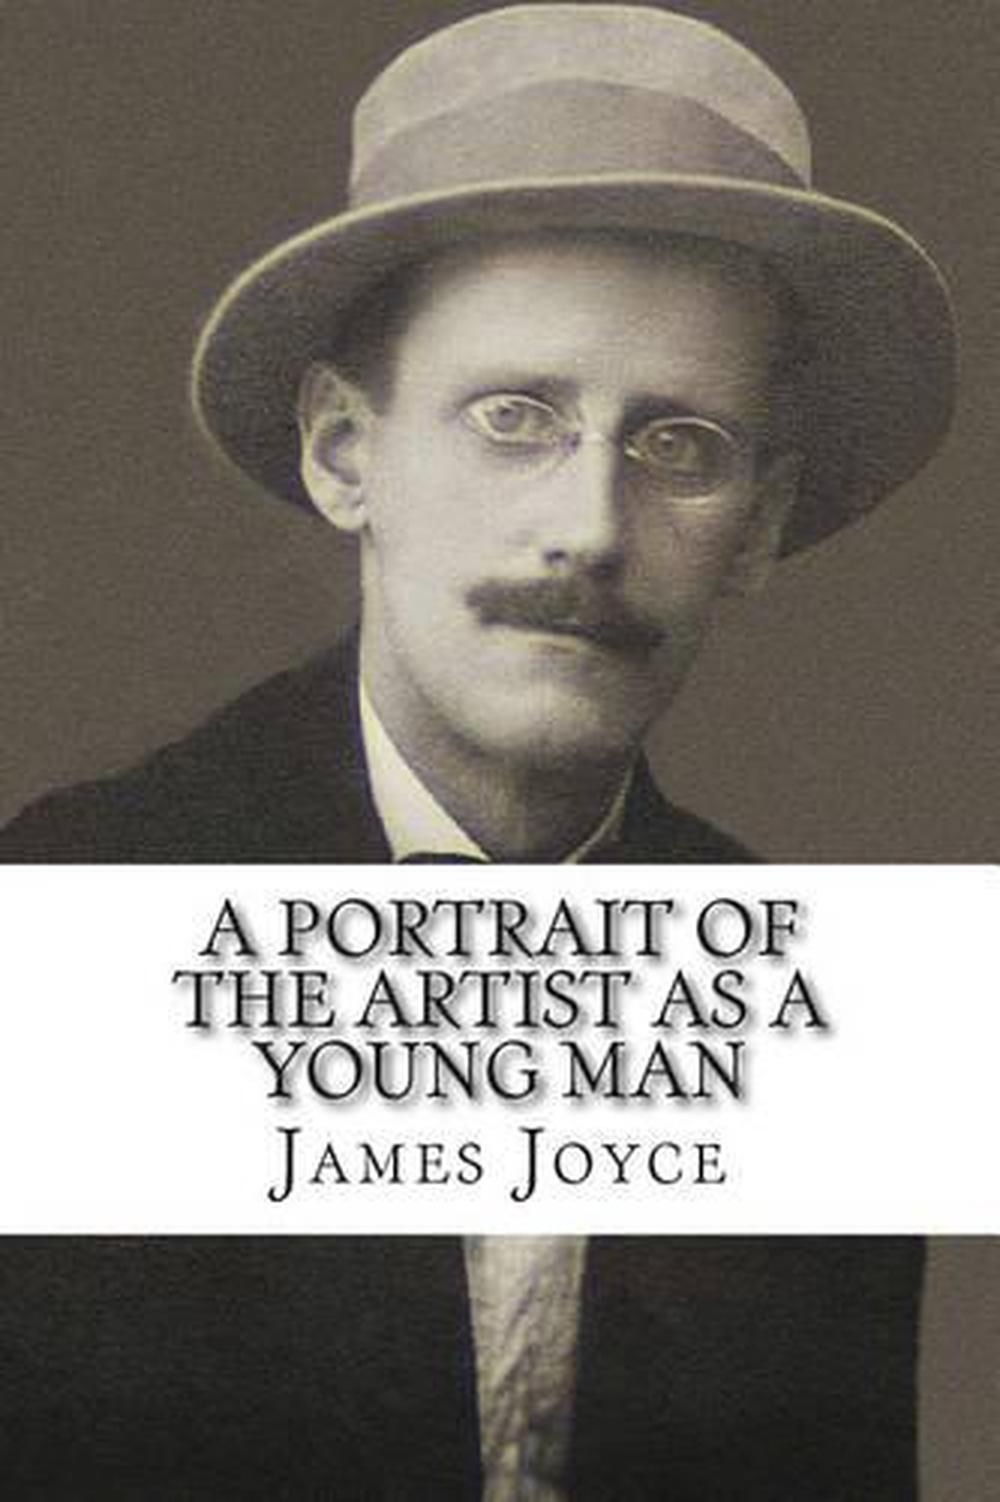 Portrait Of The Artist As A Young Man by James Joyce